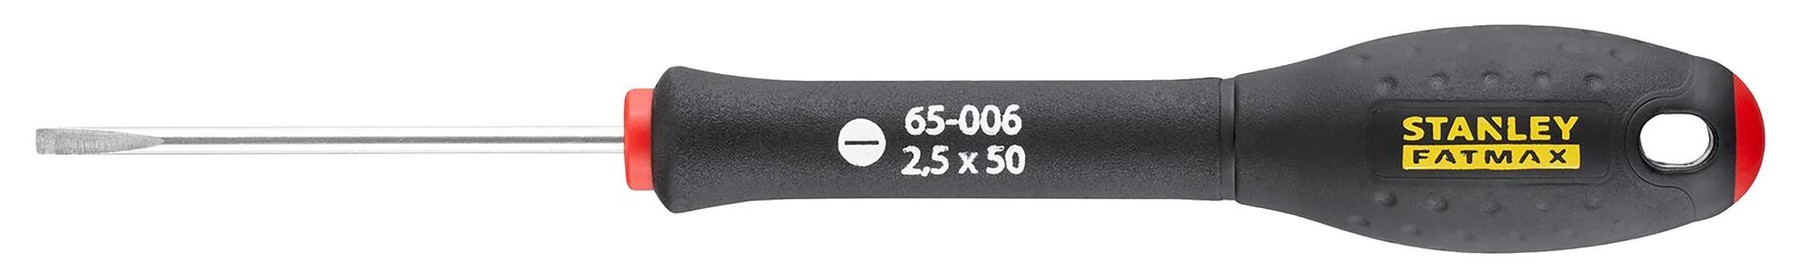 Stanley Fat Max 1-65-006 Screwdriver, Slotted, 2.5 X 50mm